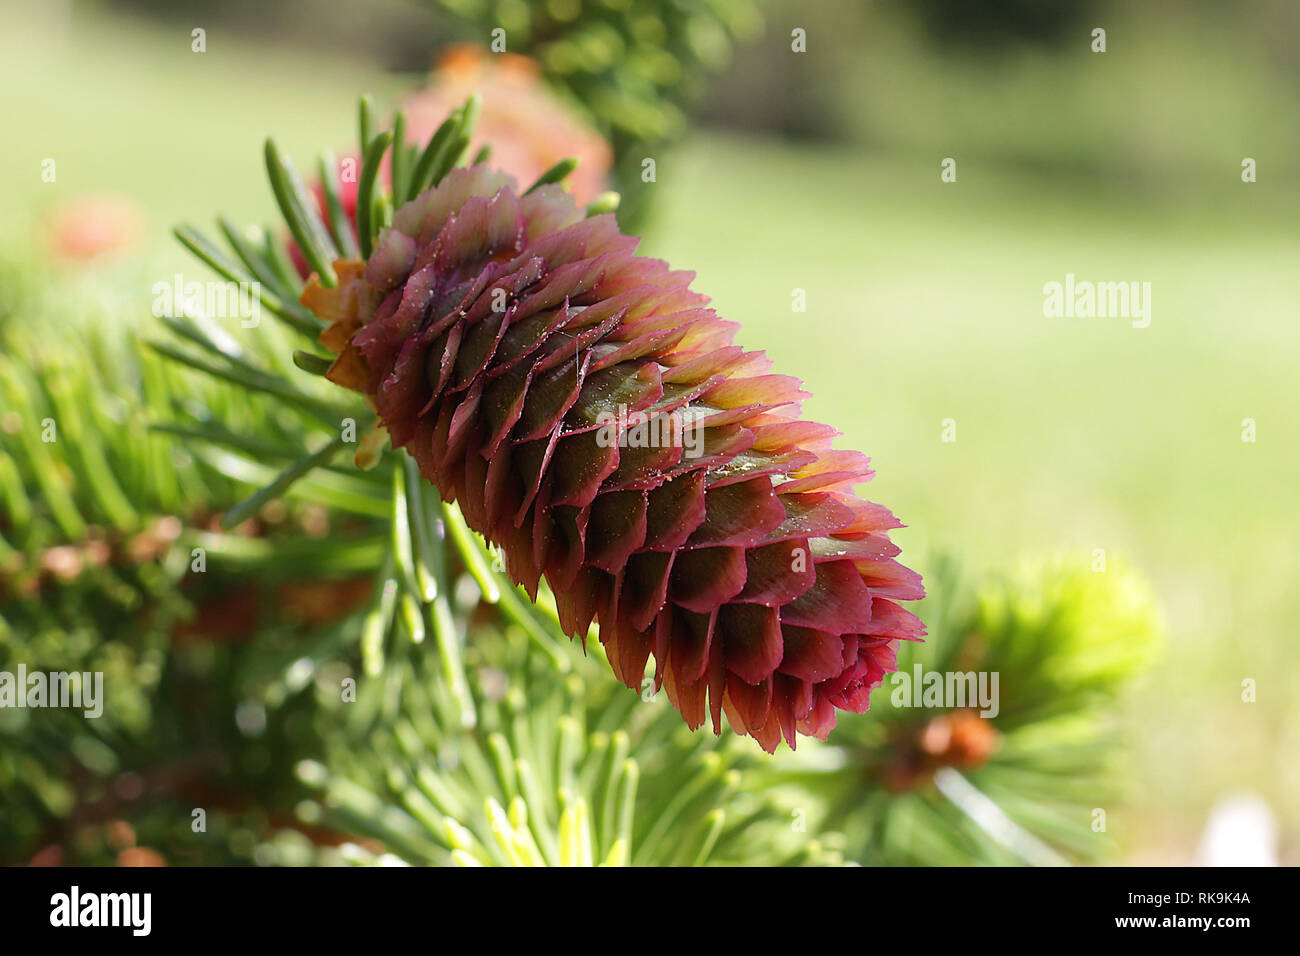 Branches of flowering spruce with red cones in spring forest. Stock Photo